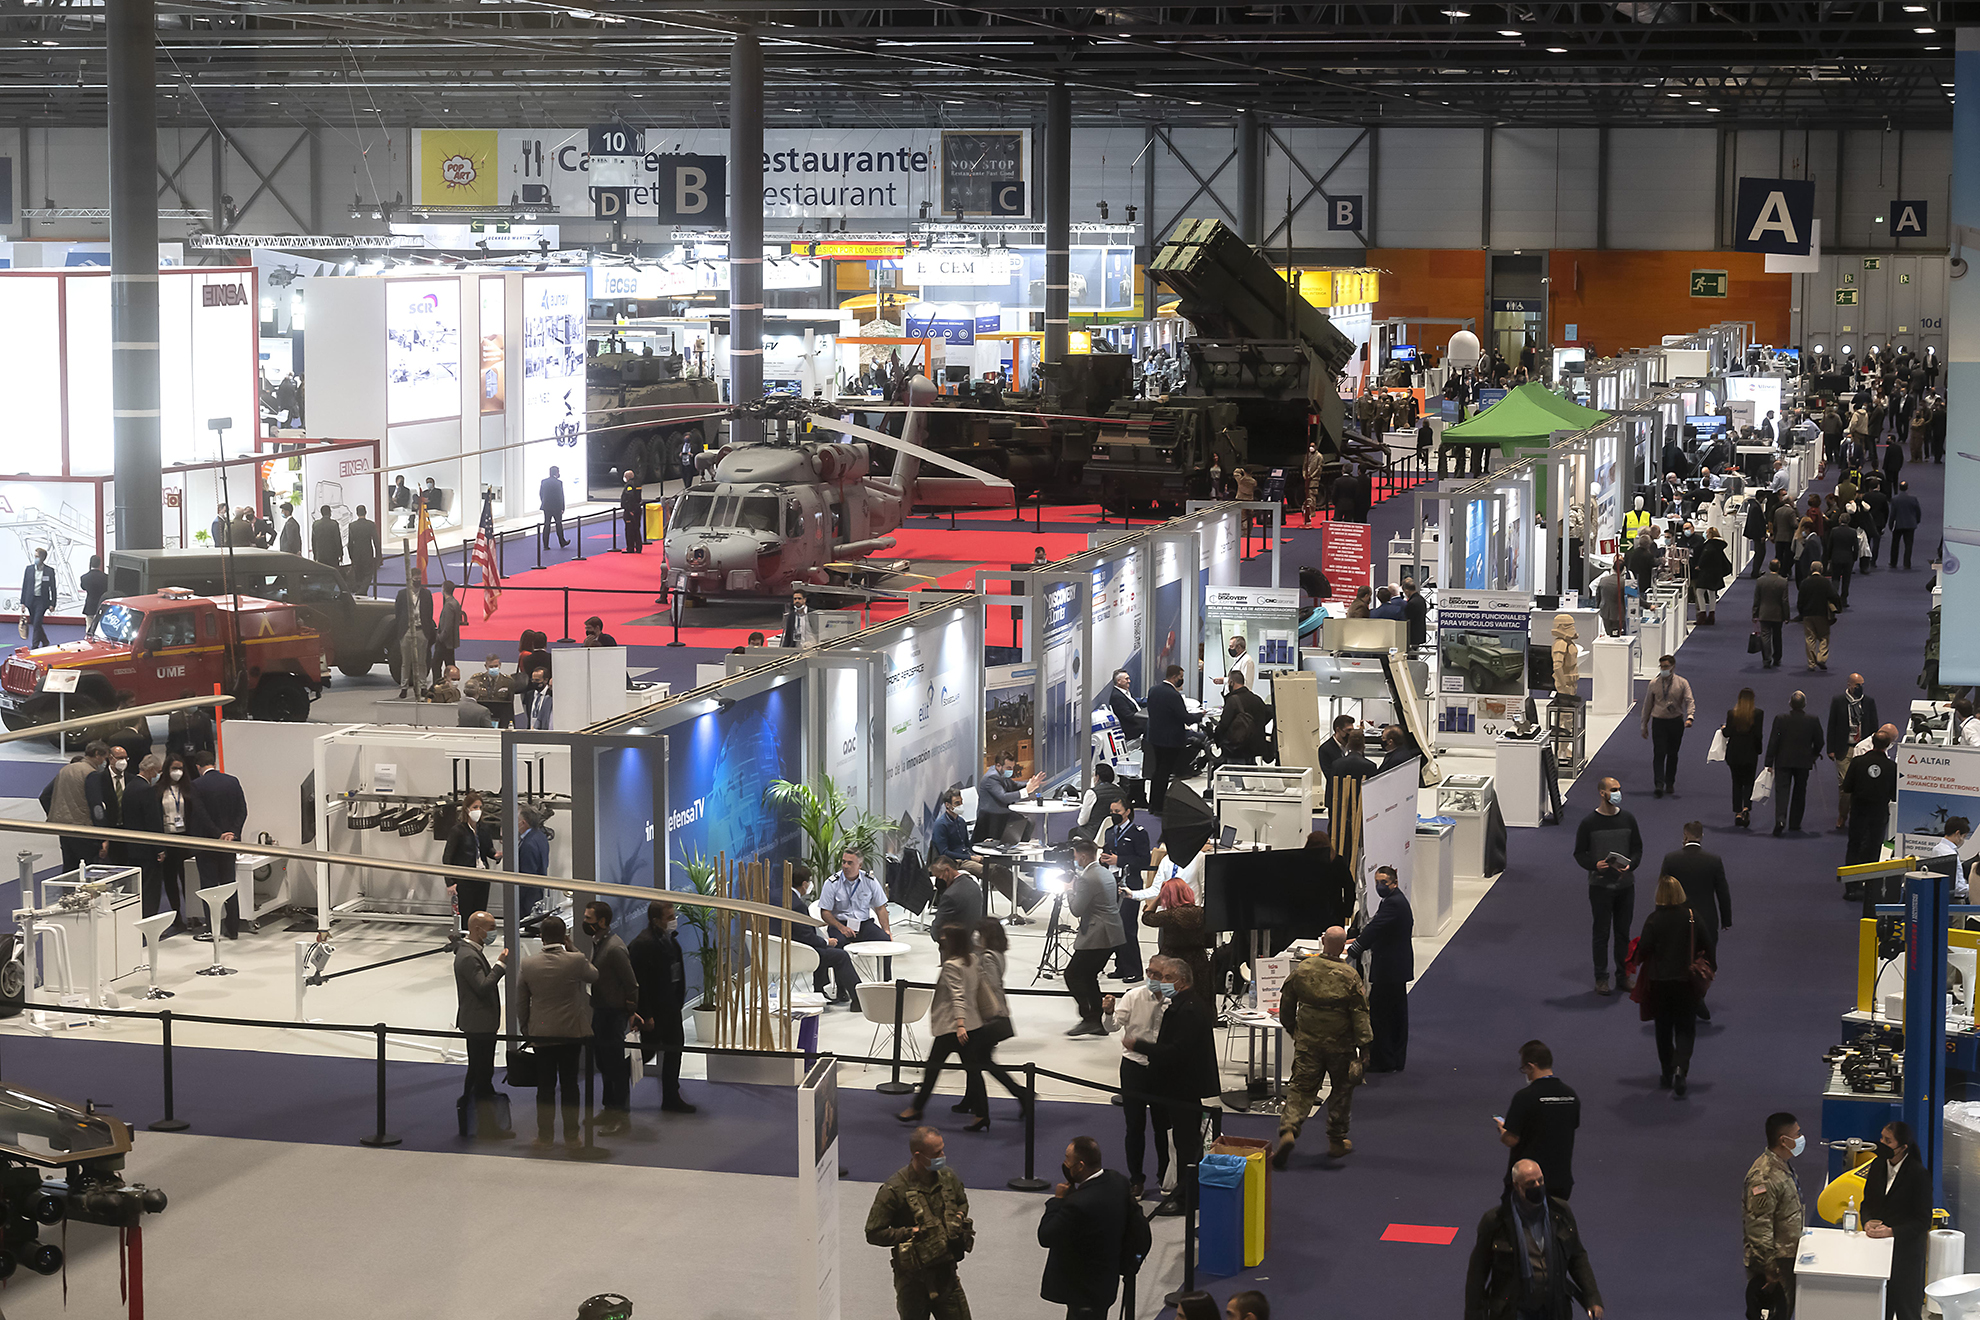 FEINDEF 23 is warming up its engines with more than 300 exhibitors already confirmed and 85% of the space occupied with four months to go.